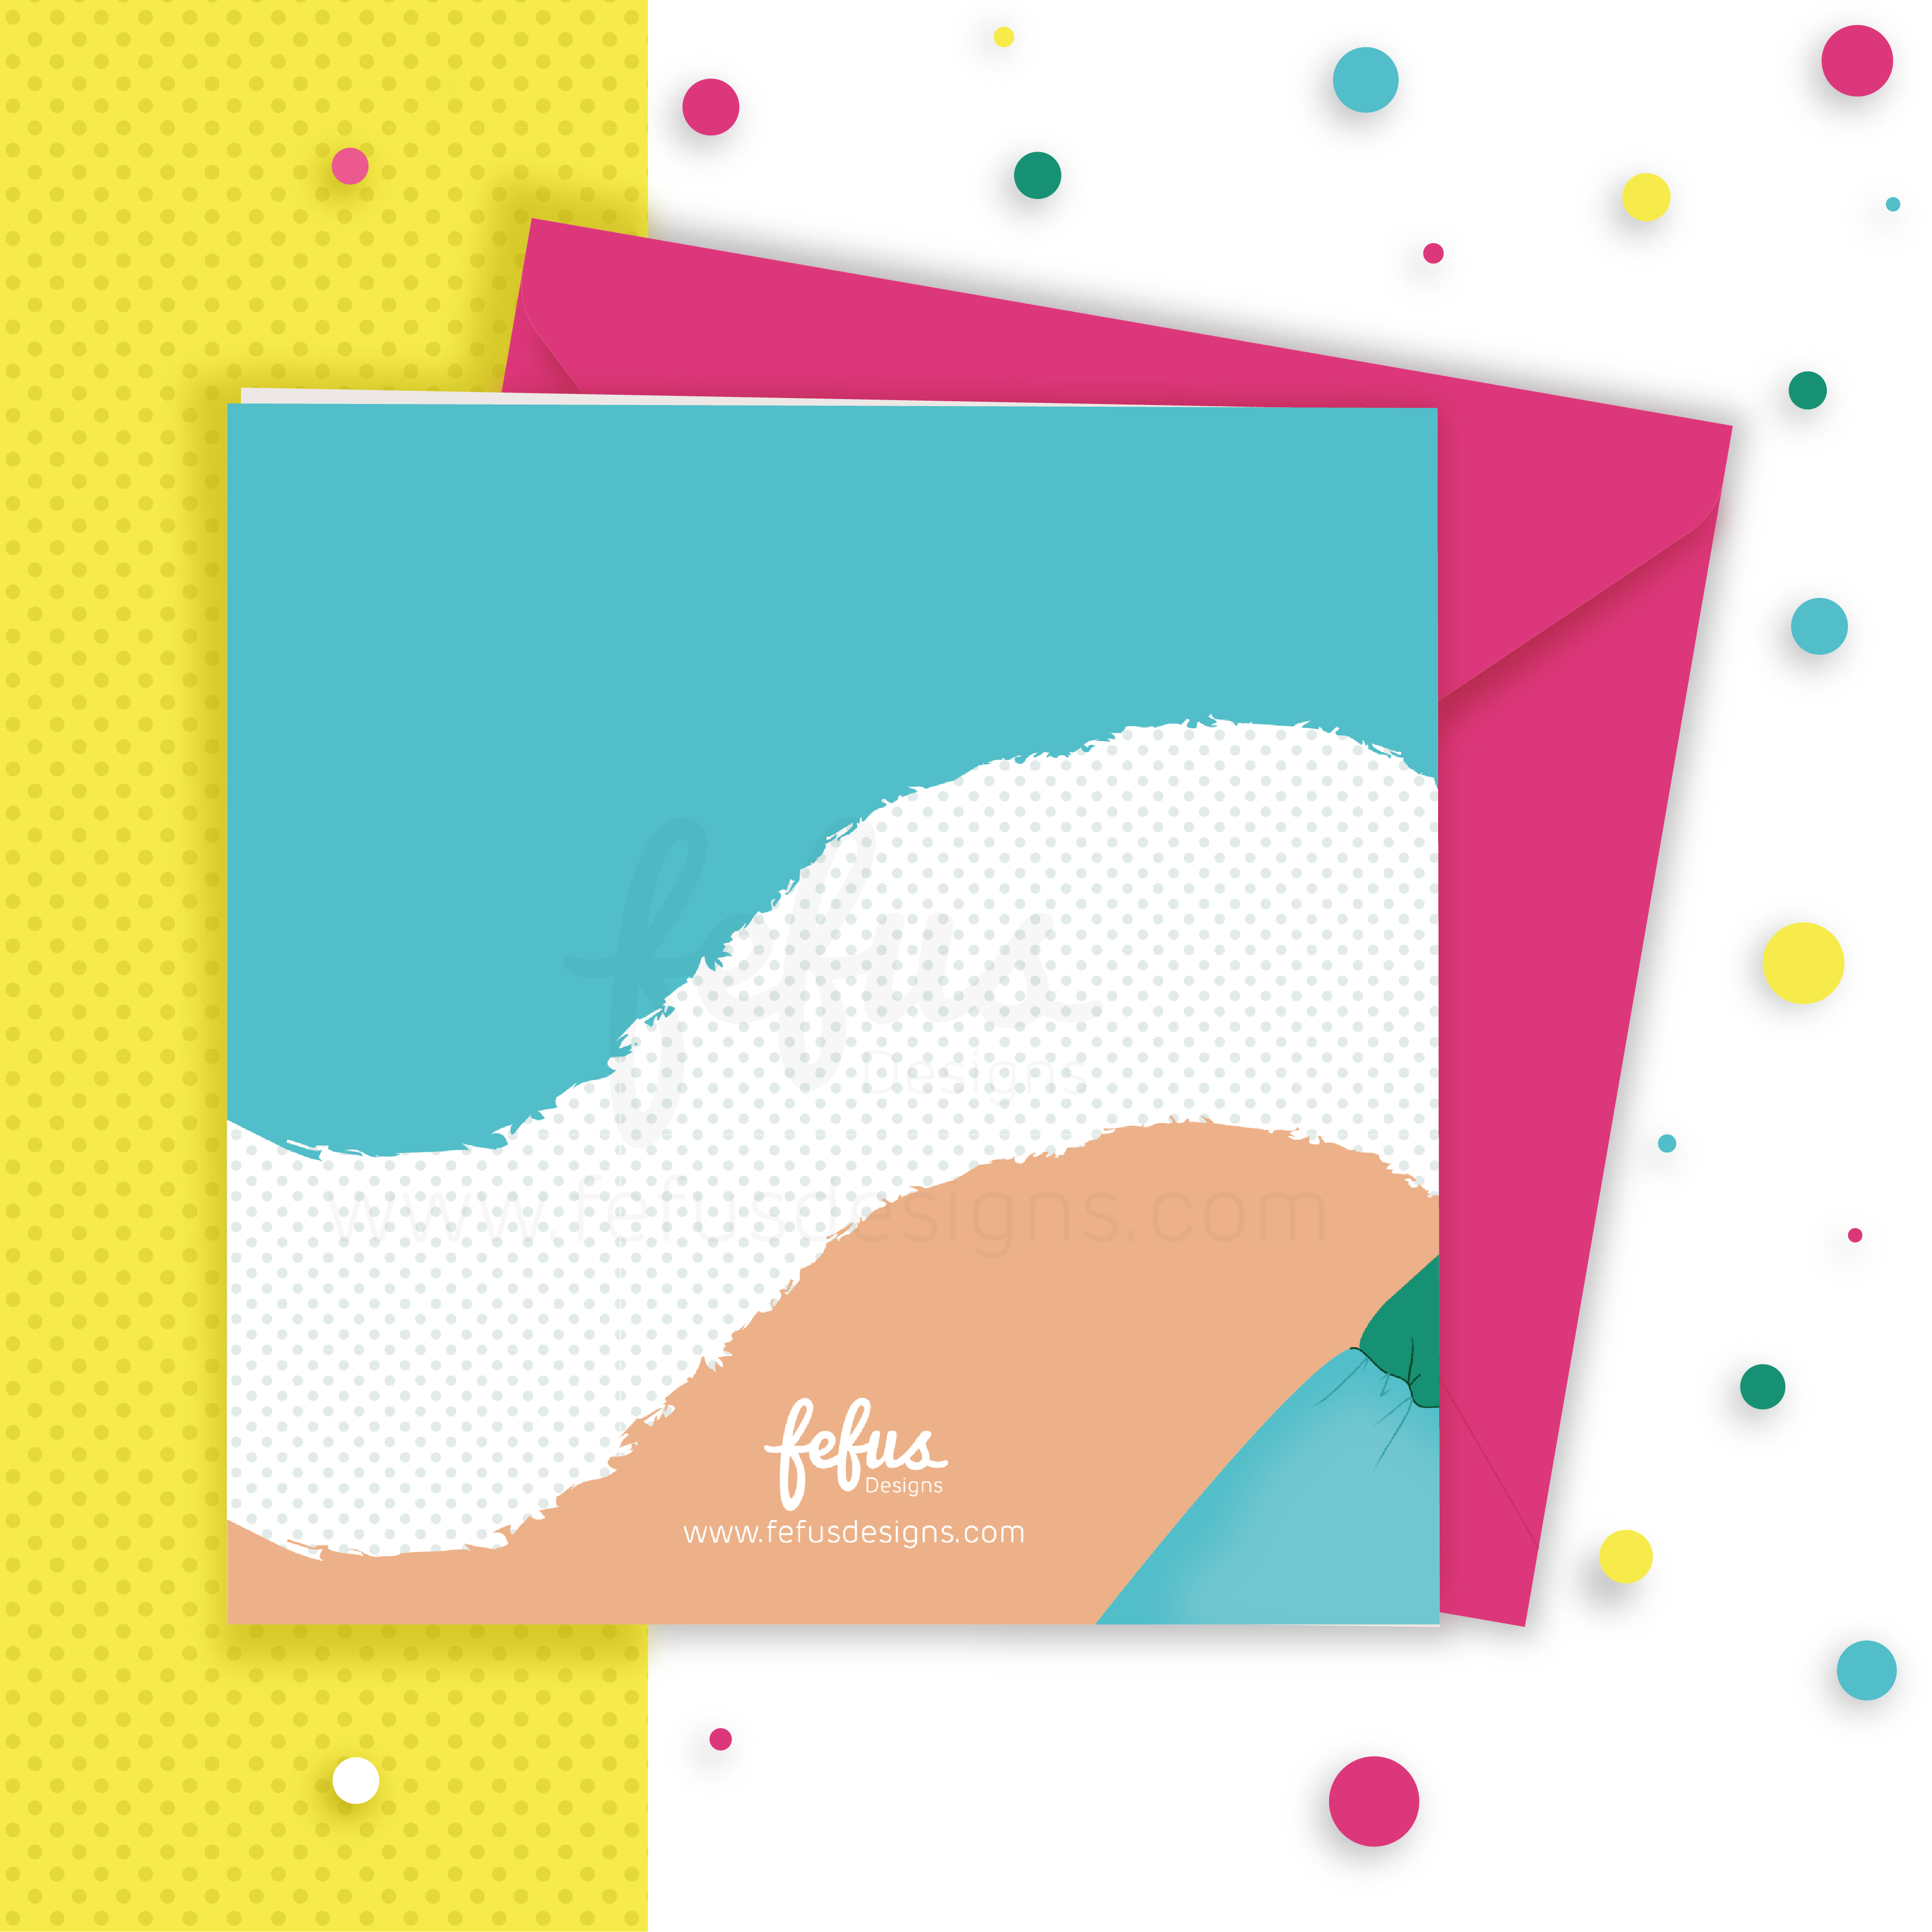 Inclusive New Mama Greetings Card for Diverse Parents-to-Be | Congratulations & Encouragement Card"